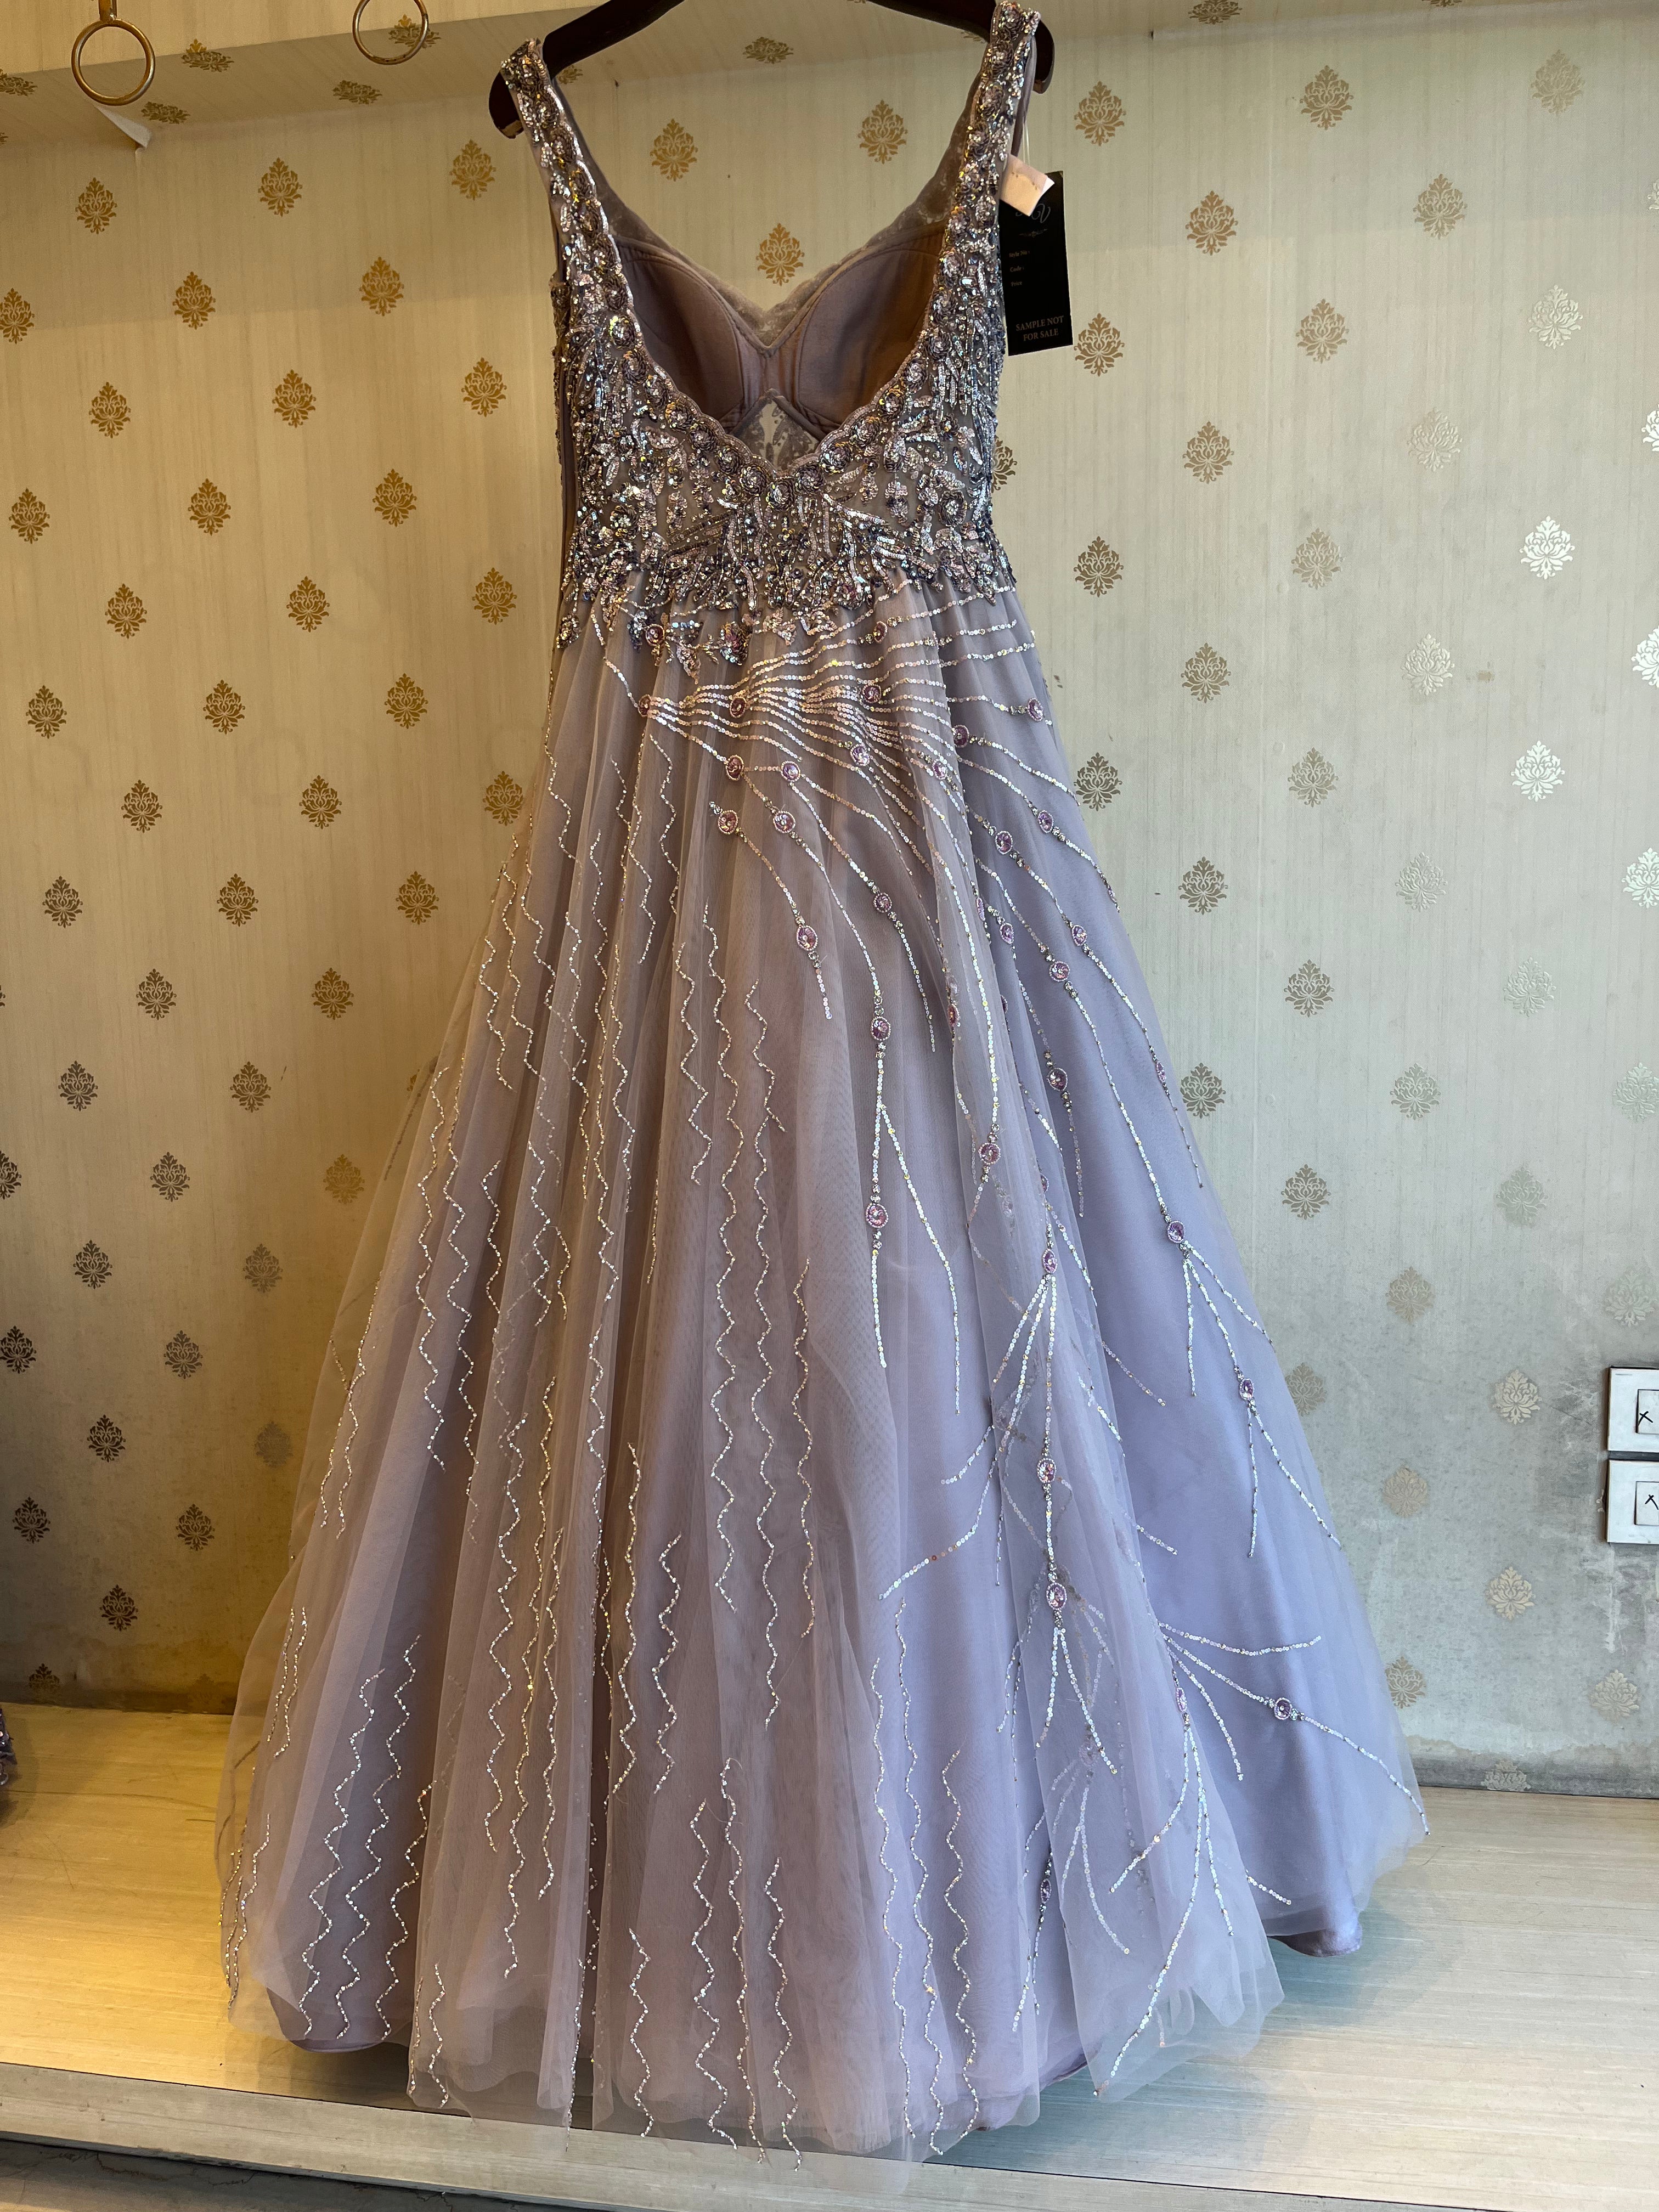 Dusty Lavender Gown